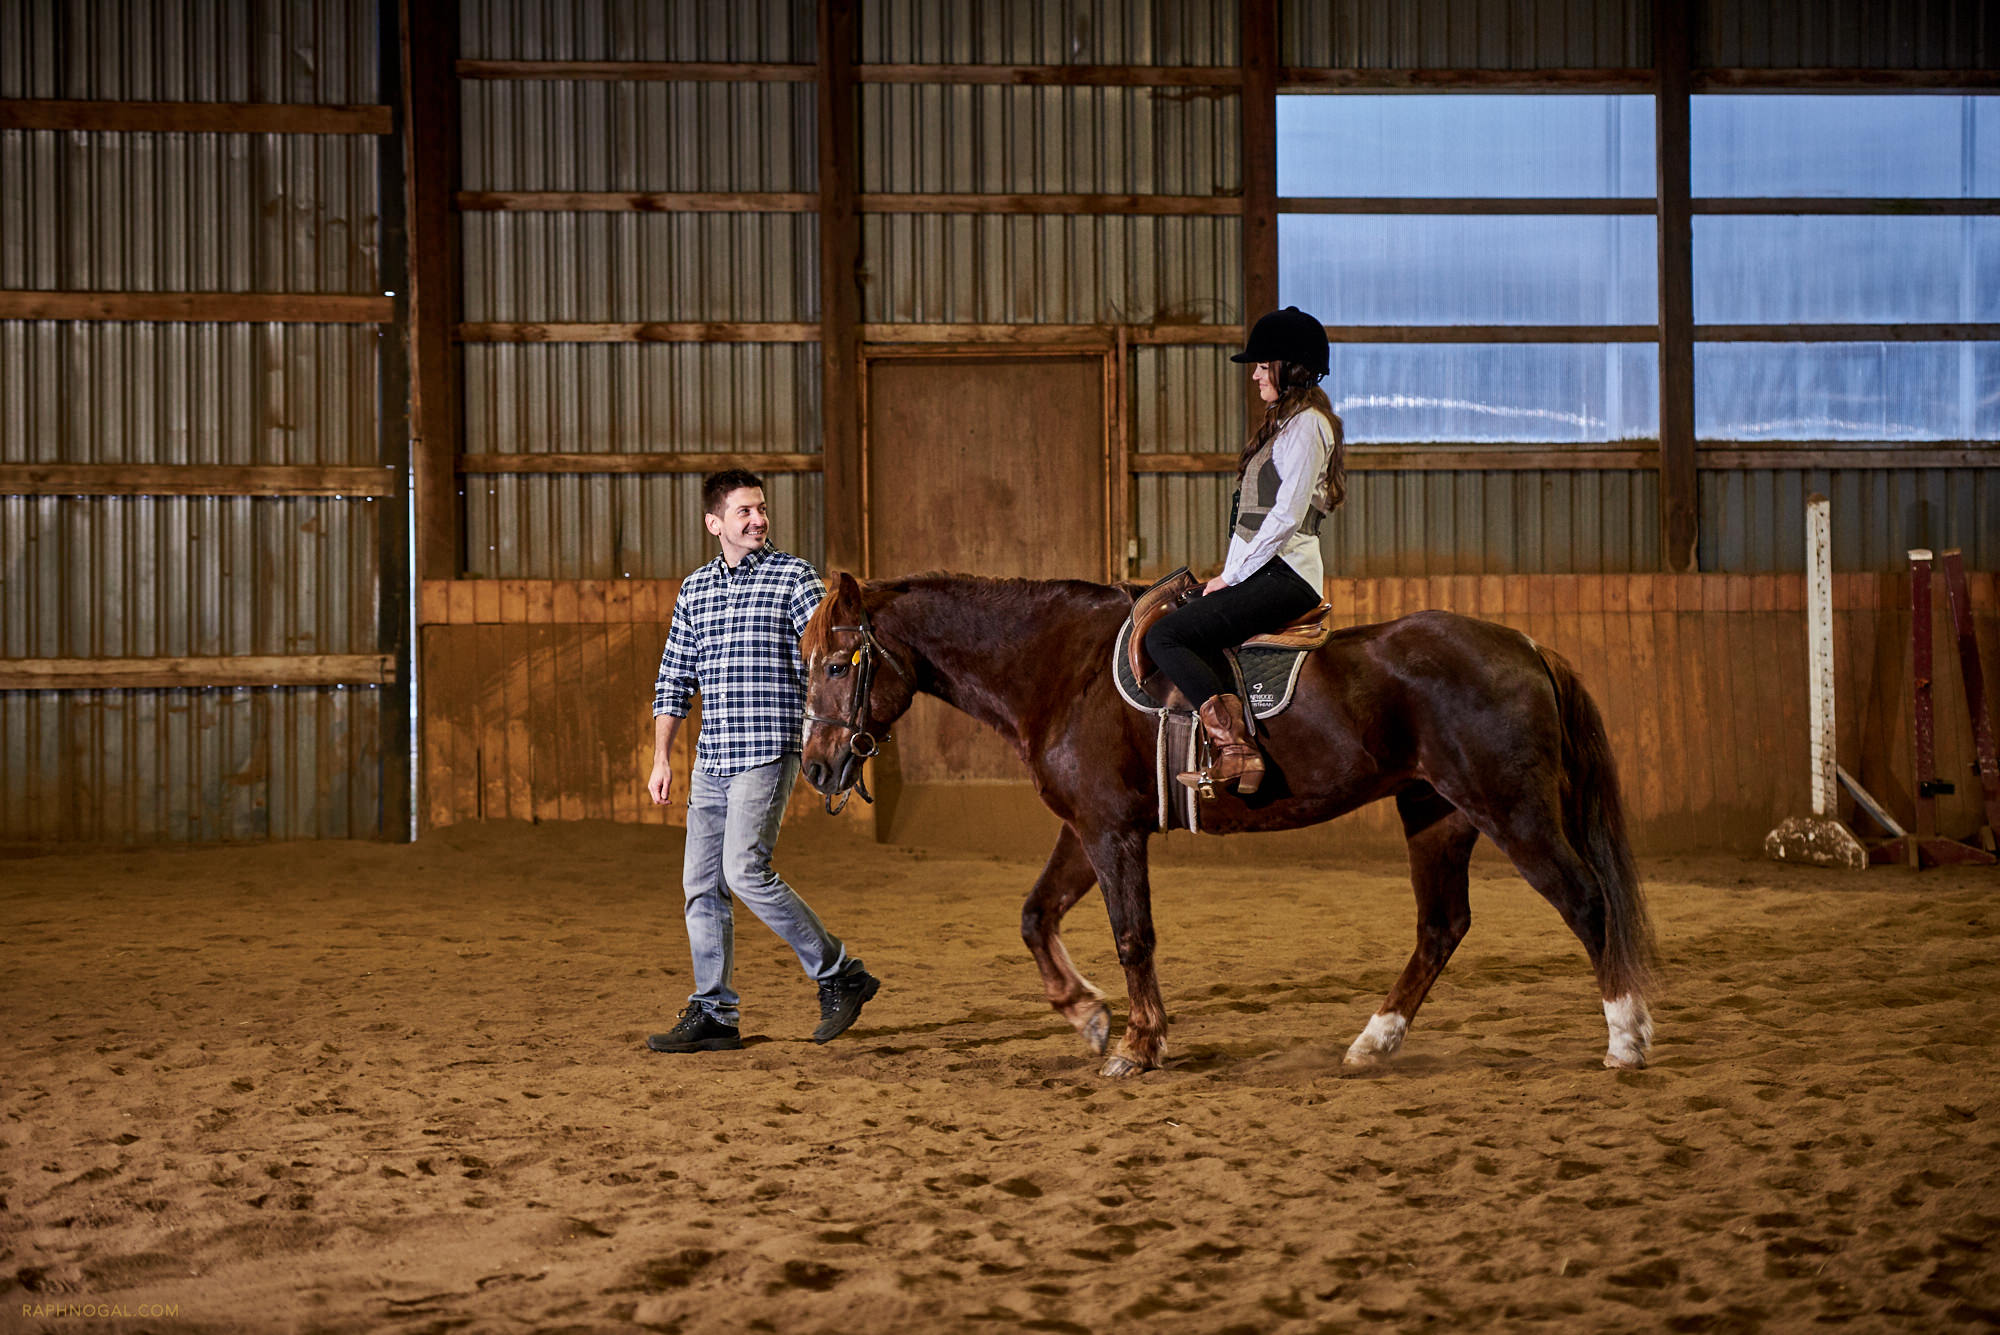 Riding the horse at Stonewood Equestrian during engagement photos